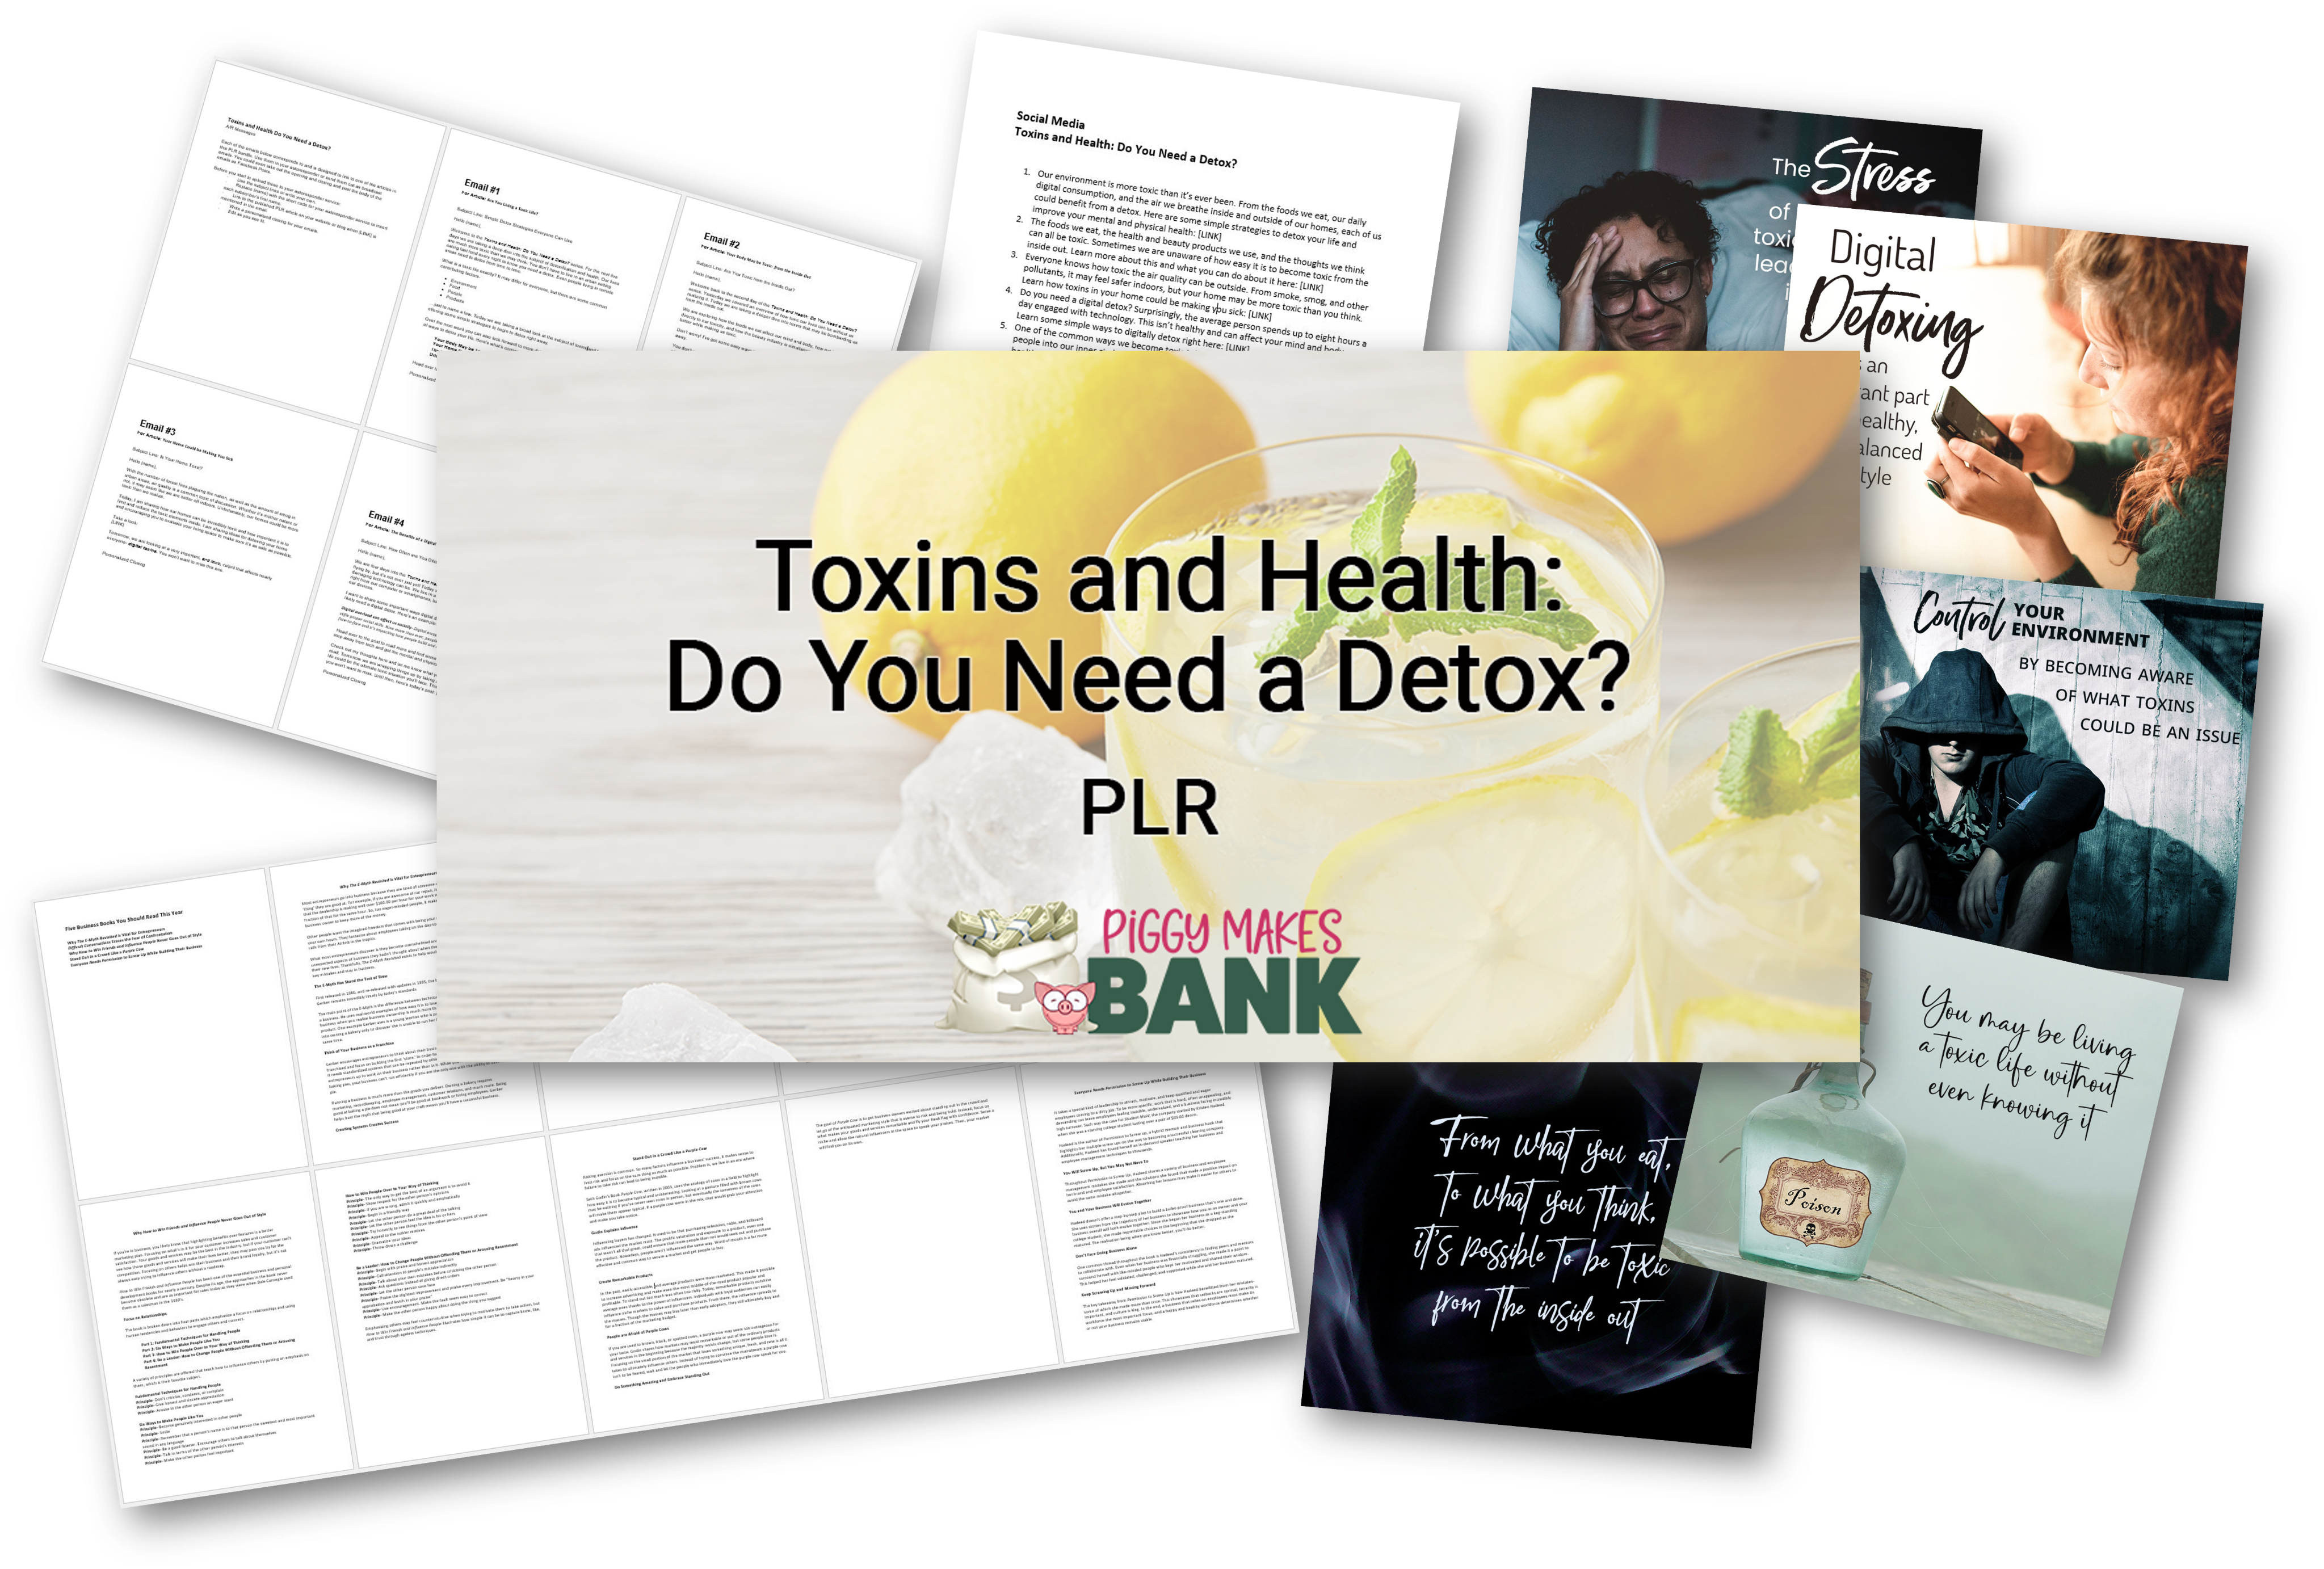 Toxins and Health: Do You Need a Detox?